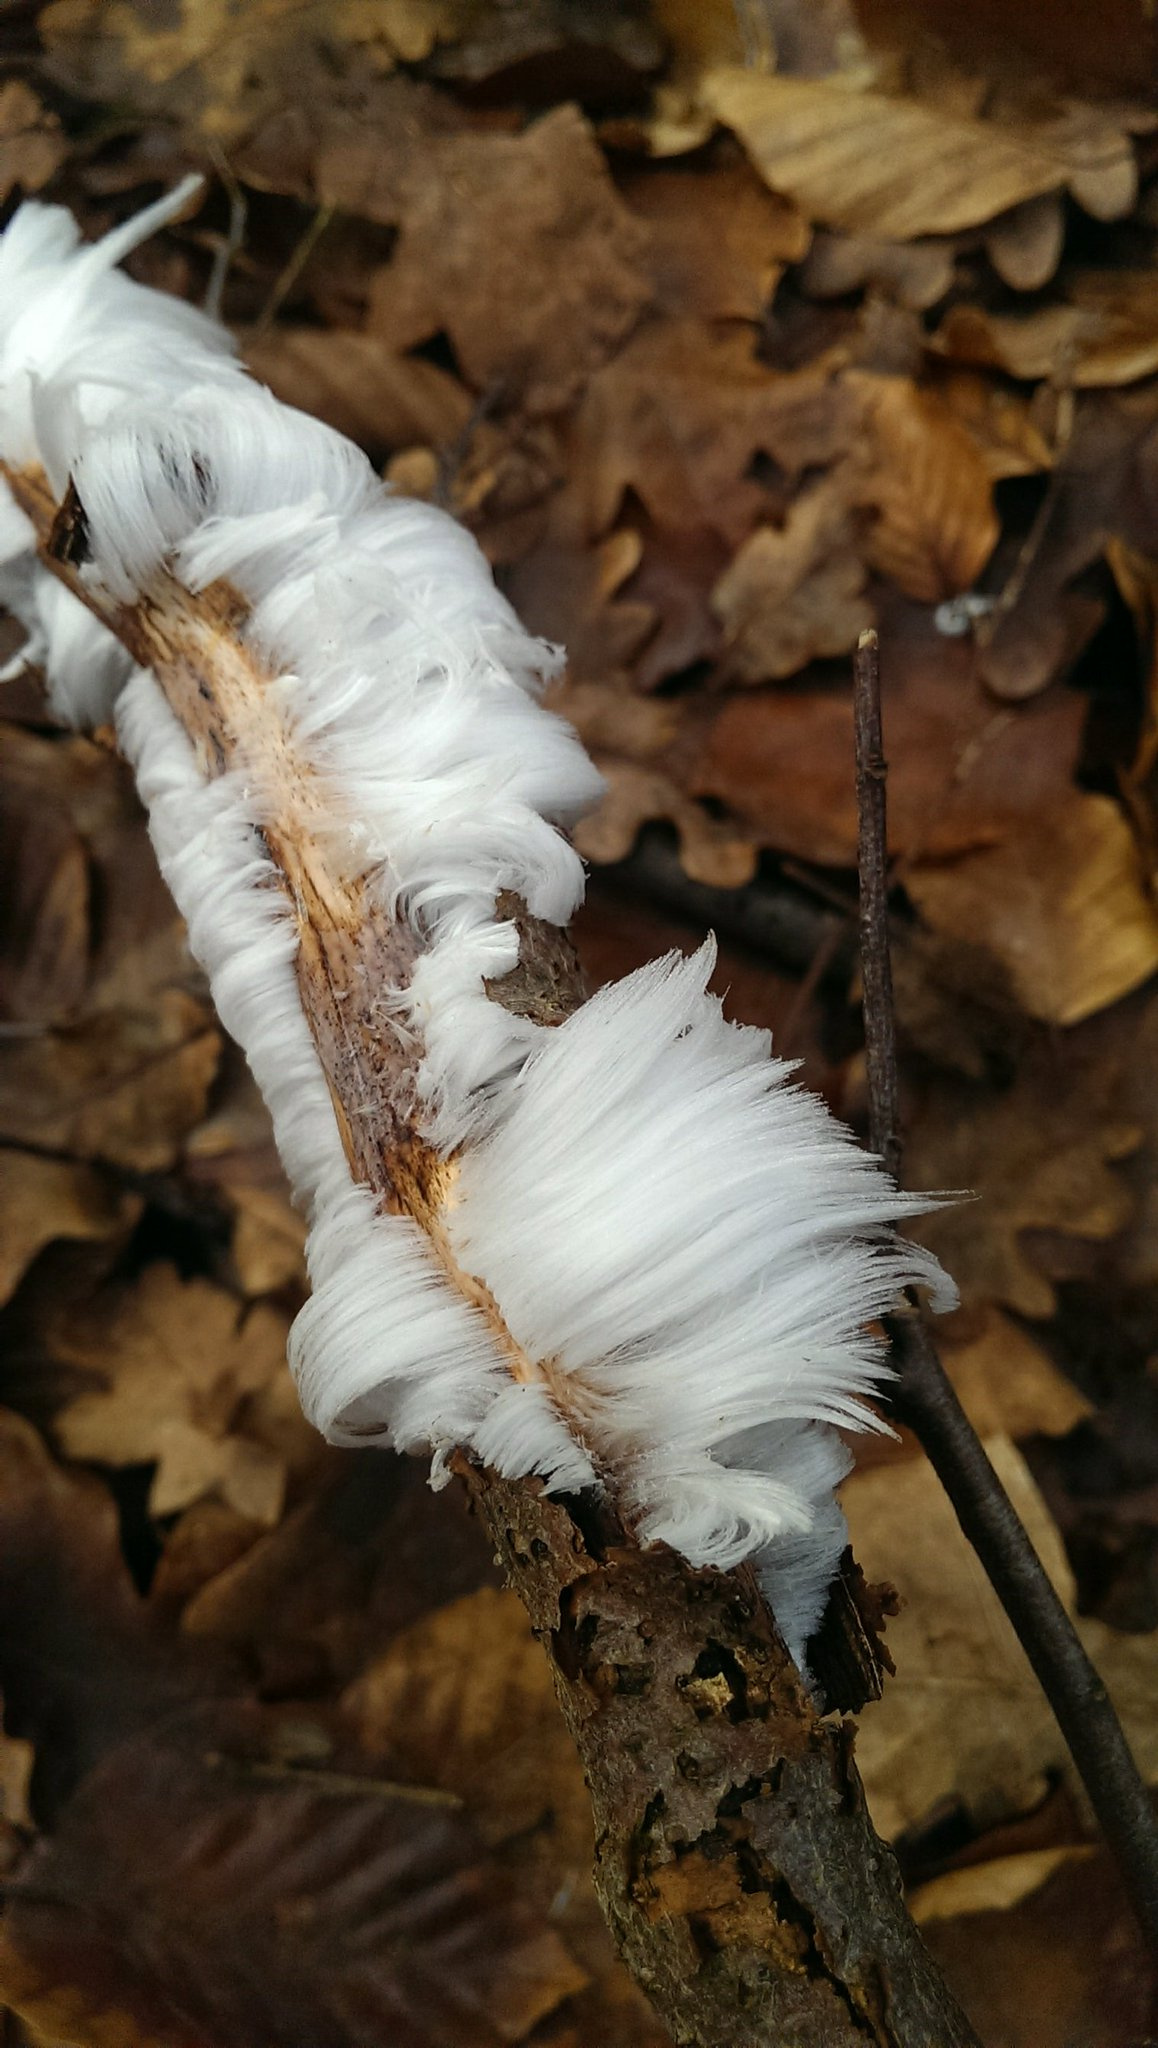 Hair ice, each strand less than 0.02mm thick, forms only in the presence of a fungus